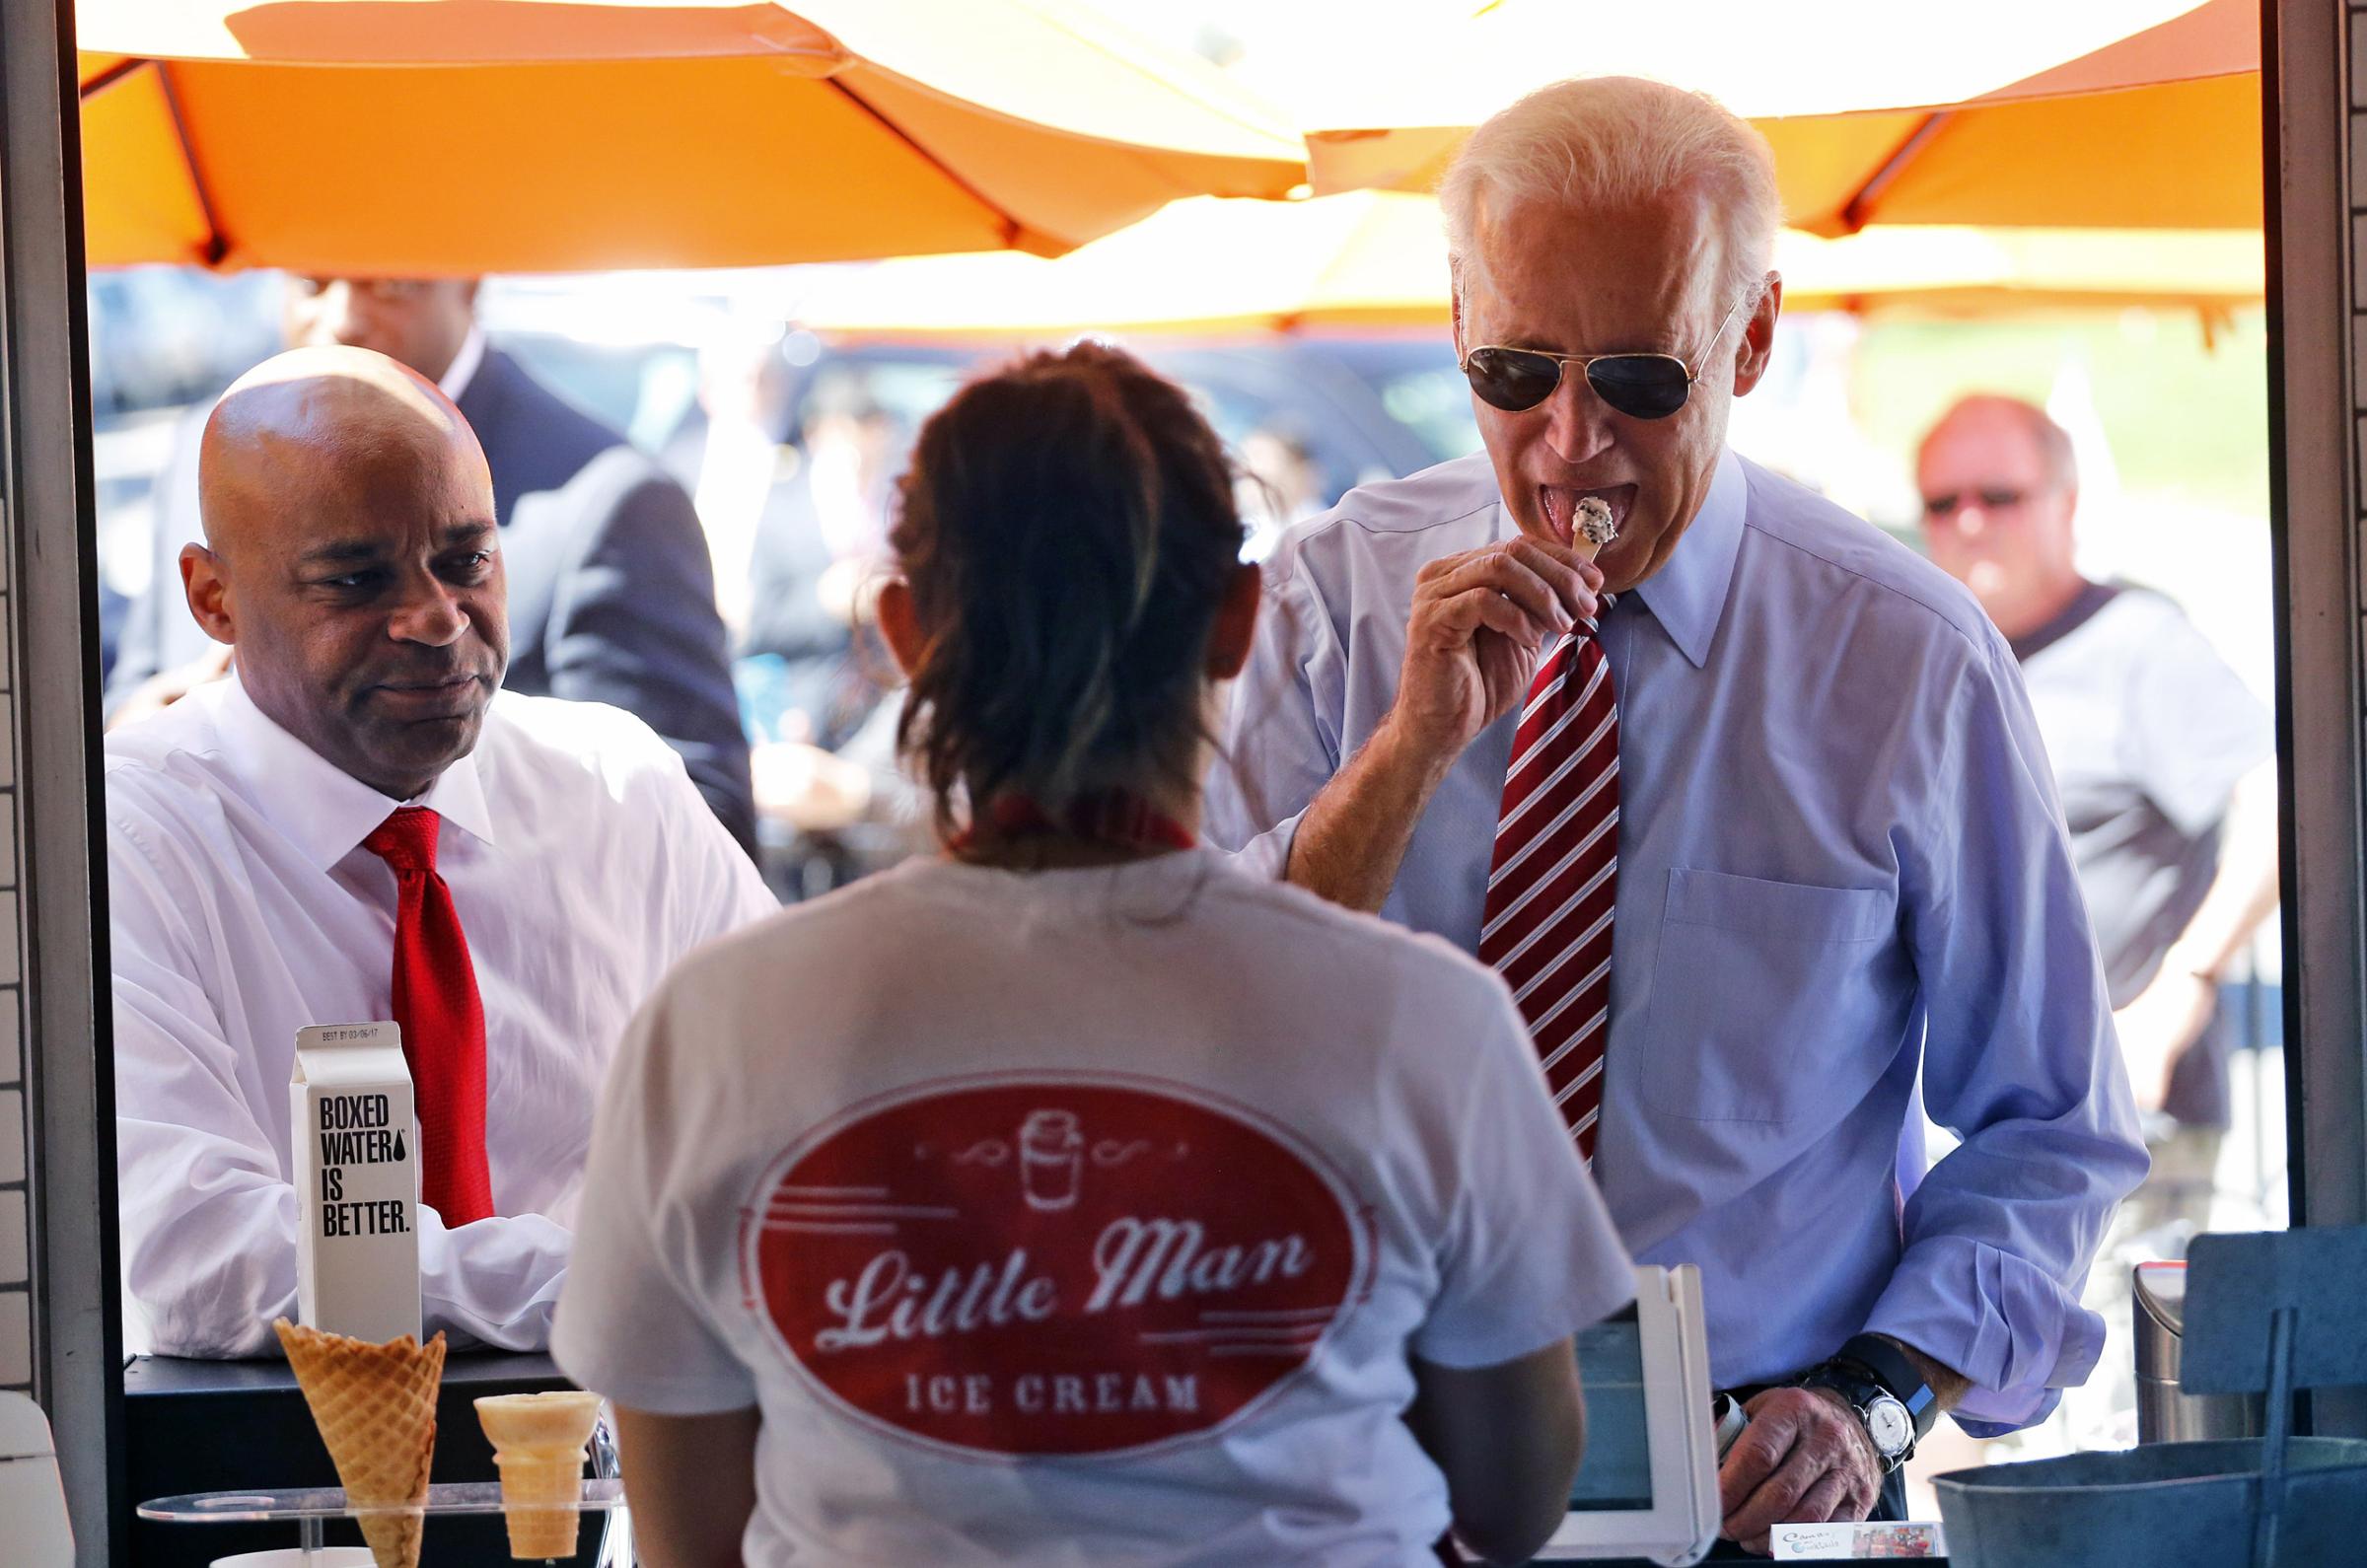 Vice President Joe Biden tastes different ice creams during a visit to Little Man Ice Cream, in Denver on July 21, 2015.